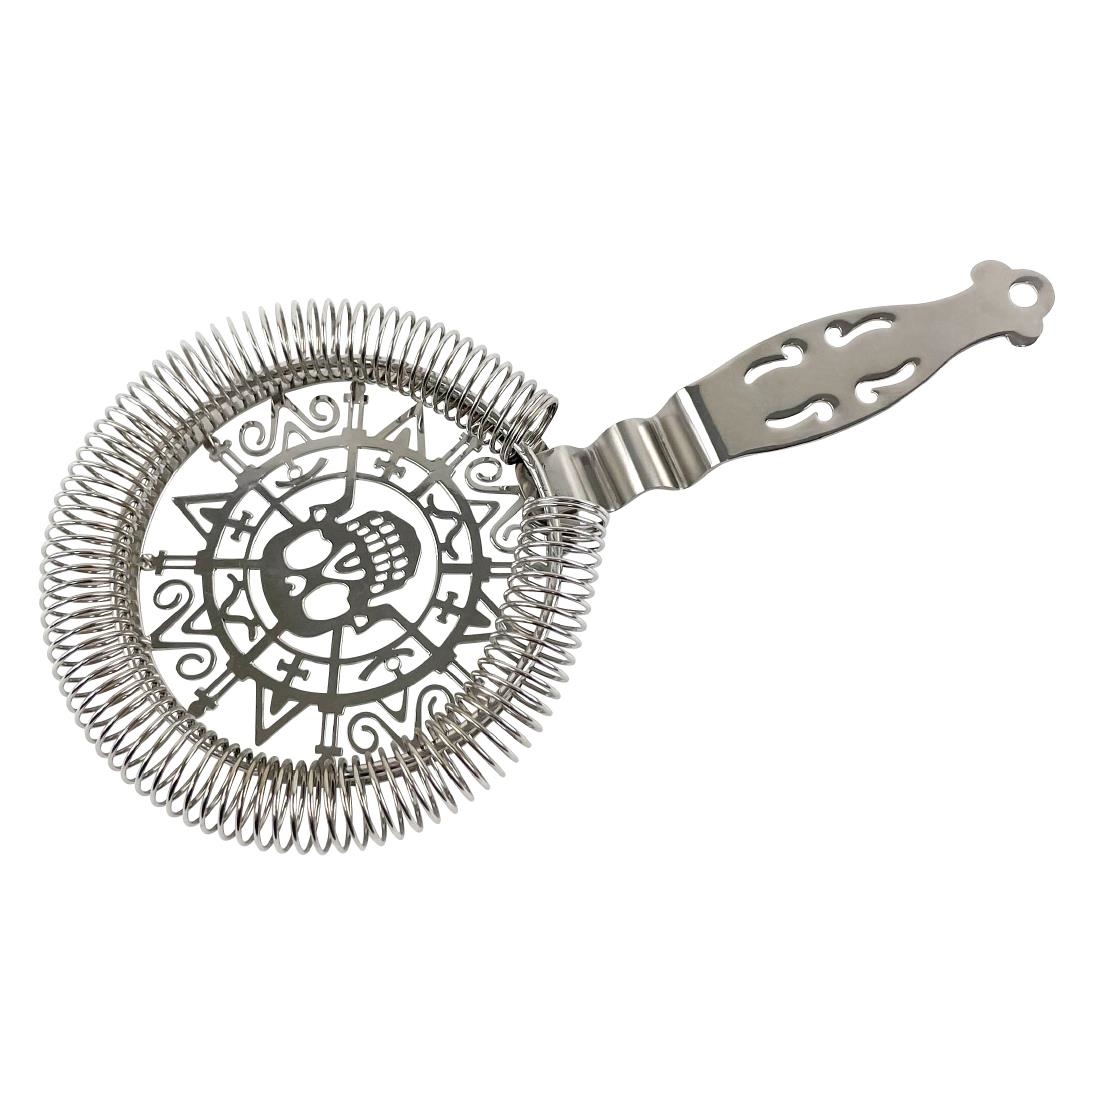 Beaumont Stainless Steel Skull Throwing Strainer (CZ660)